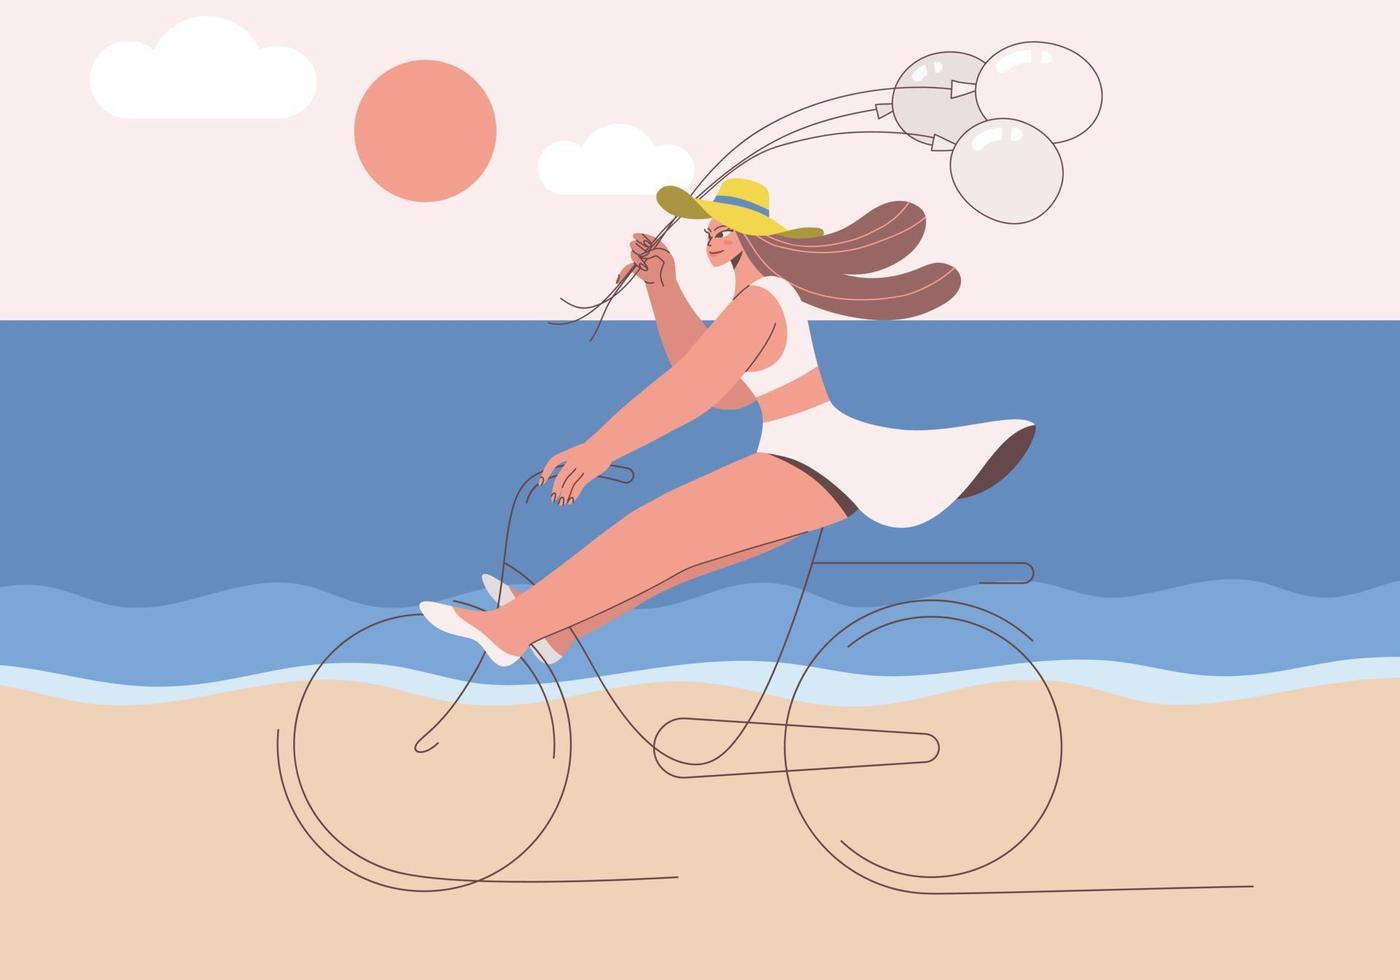 Woman wearing white swimsuit on bike with holding balloon in the beach vector